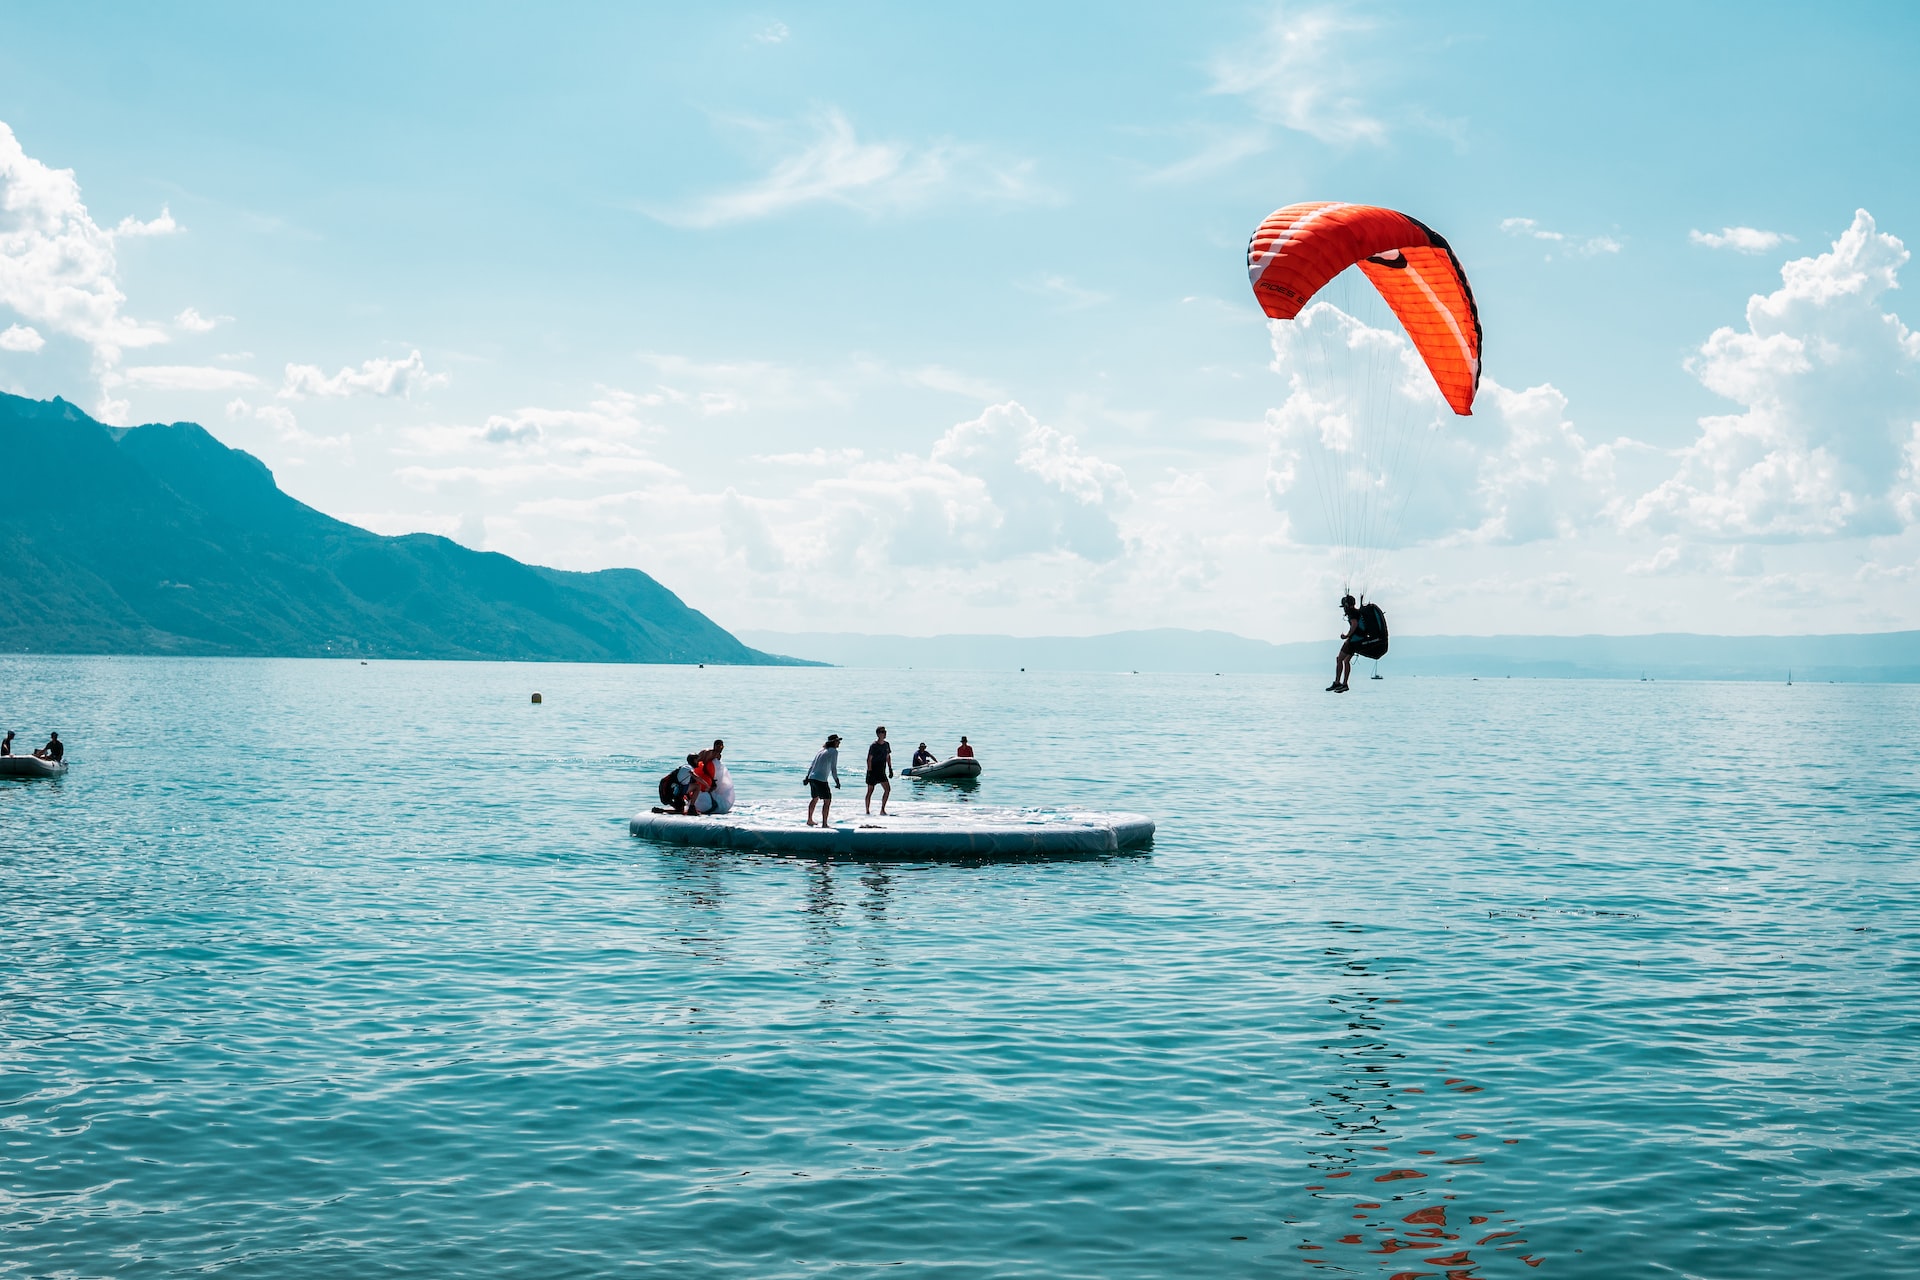 A paraglider landing on a floating dock in Lac Leman.